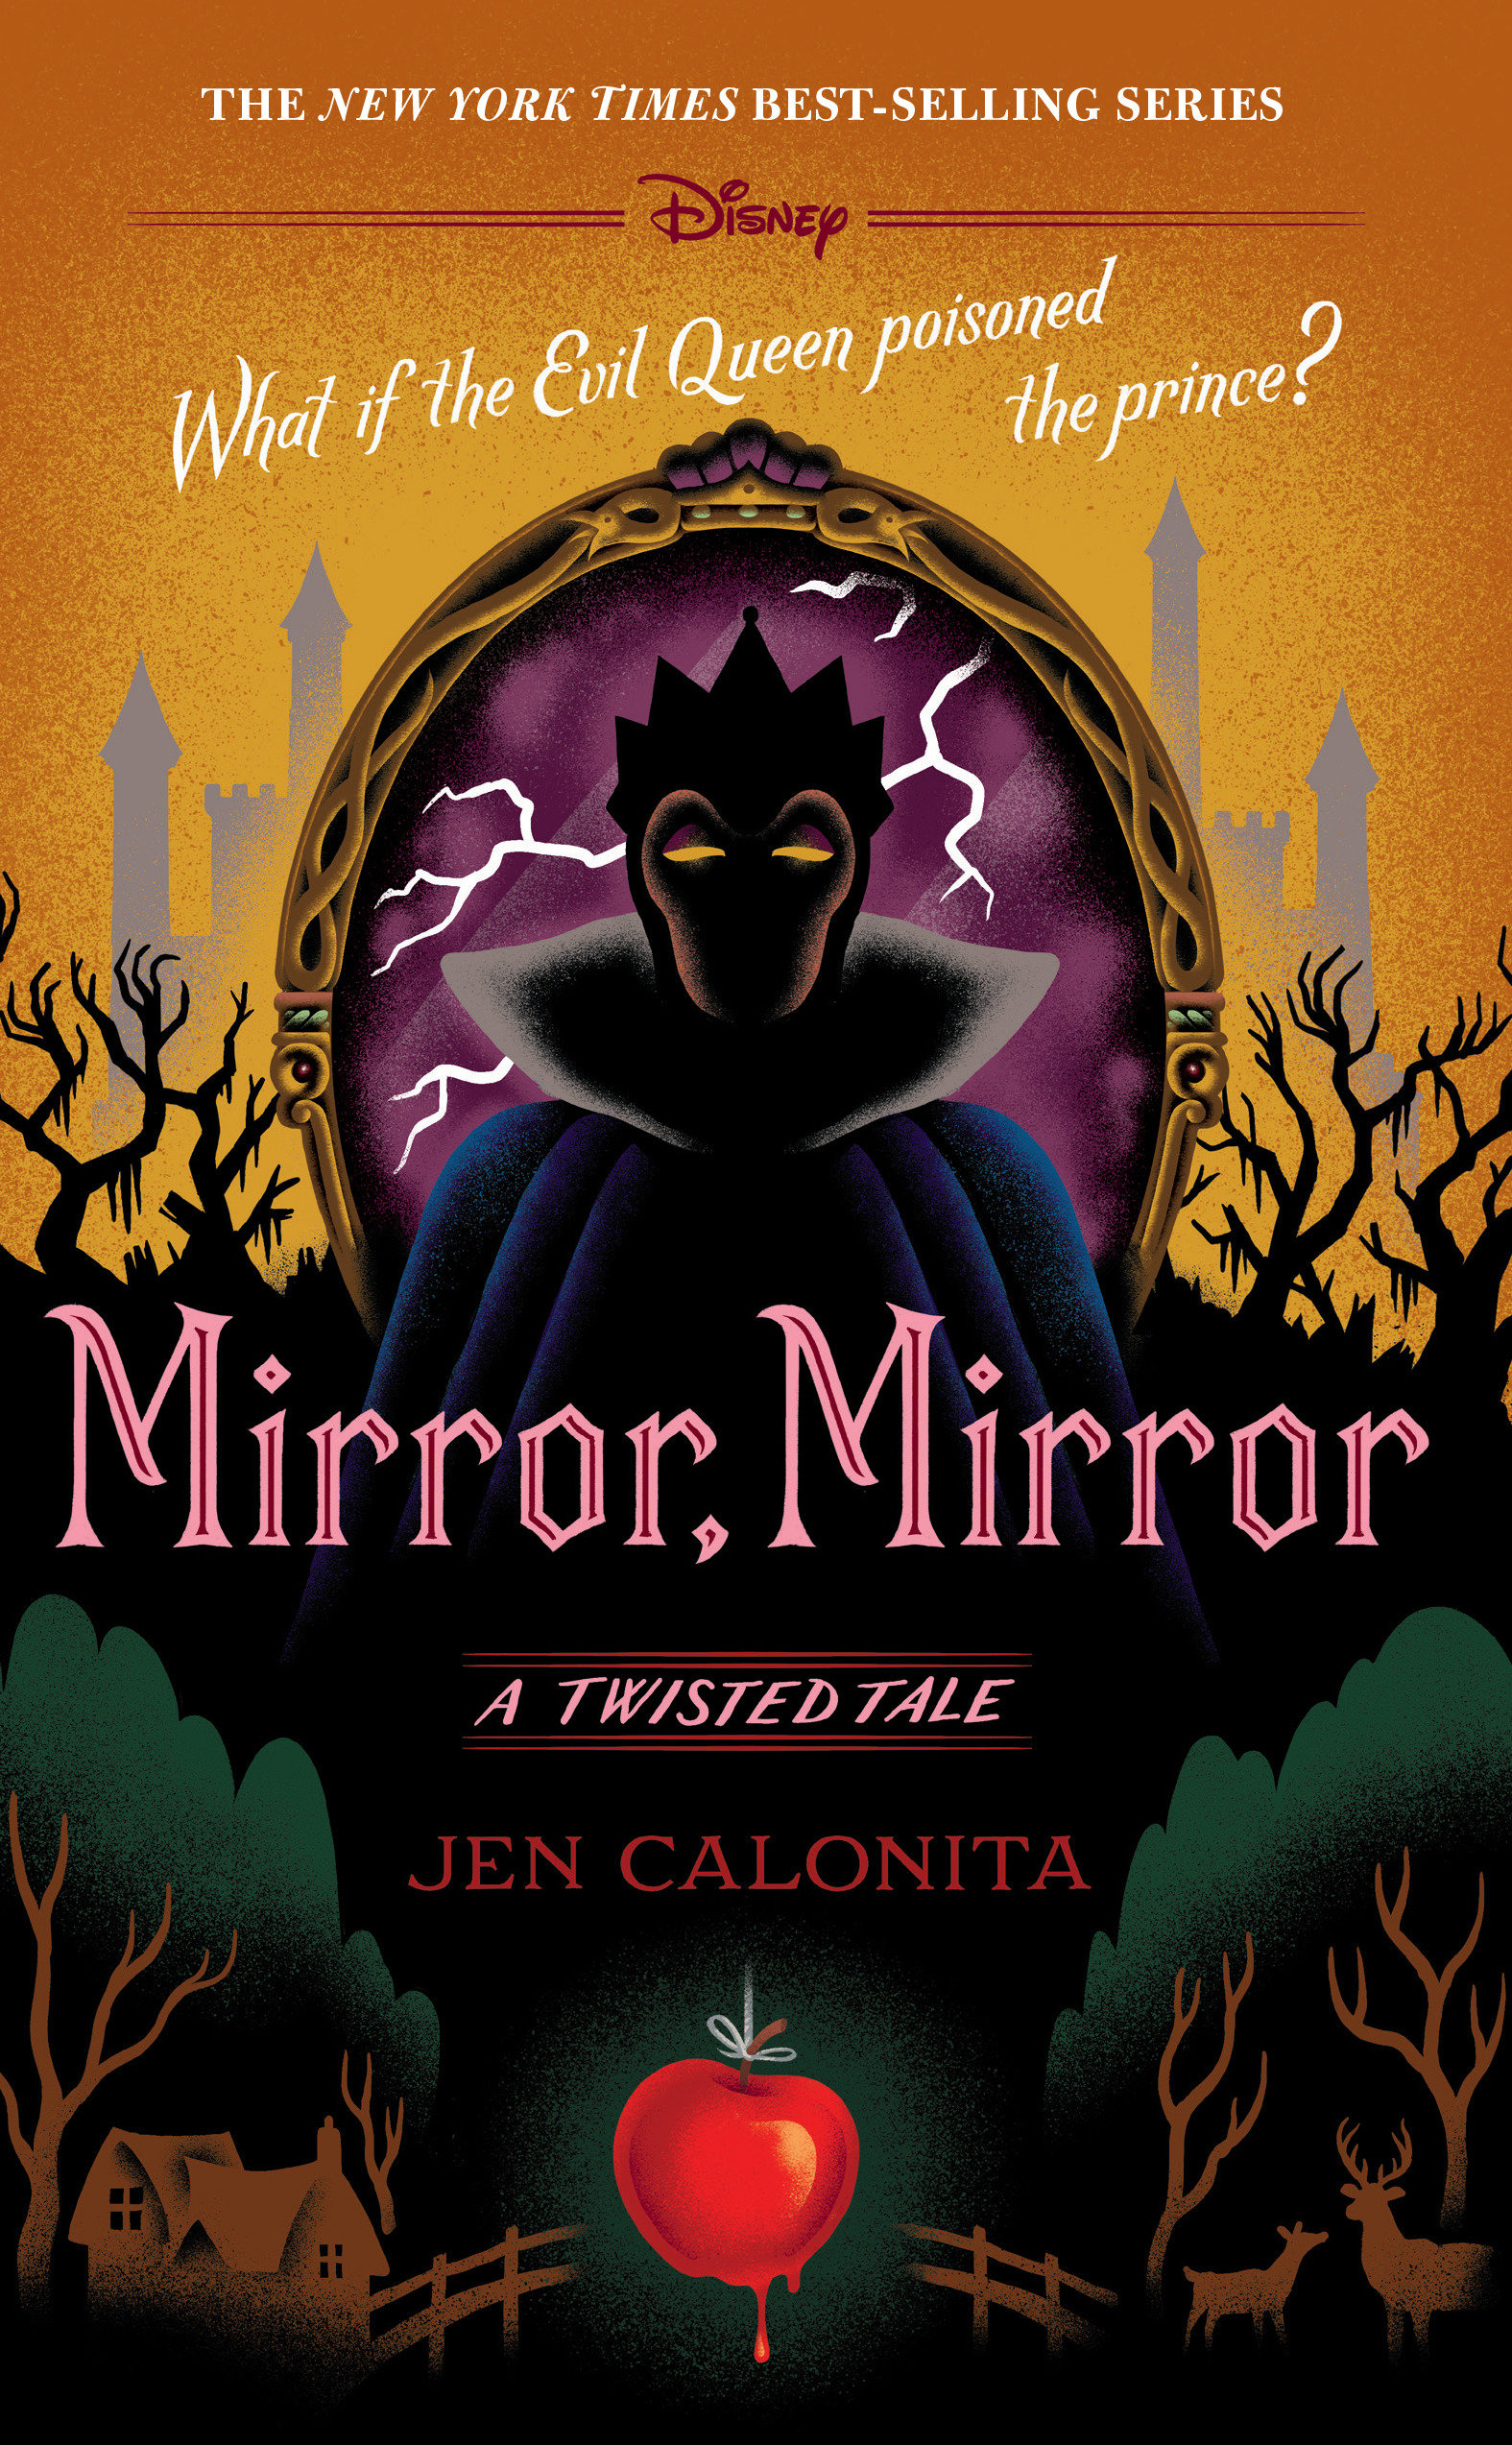 Mirror, Mirror-A Twisted Tale (Hardcover Book)